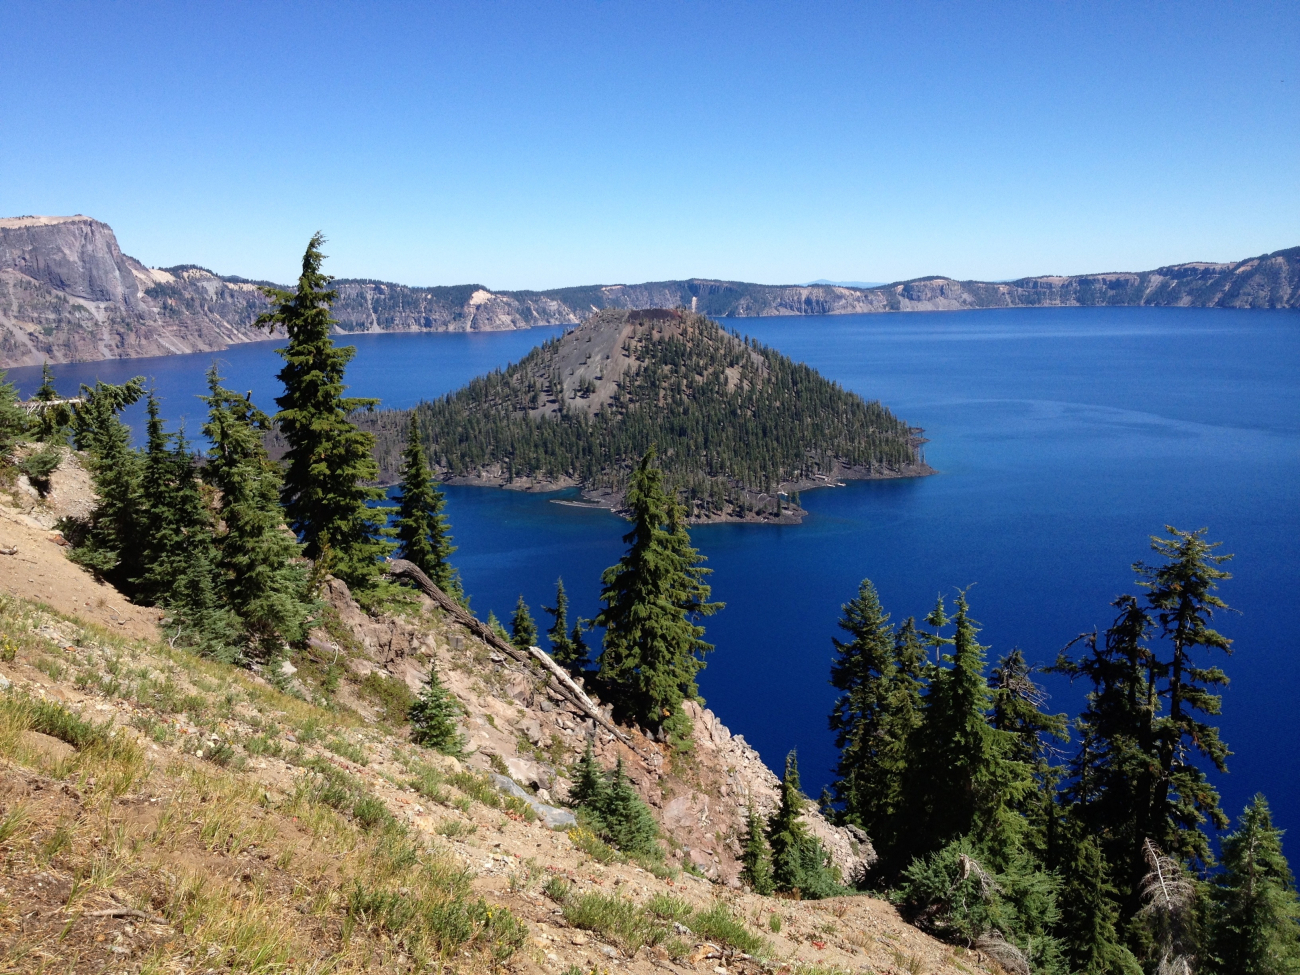 A view of Wizard Island in Crater Lake